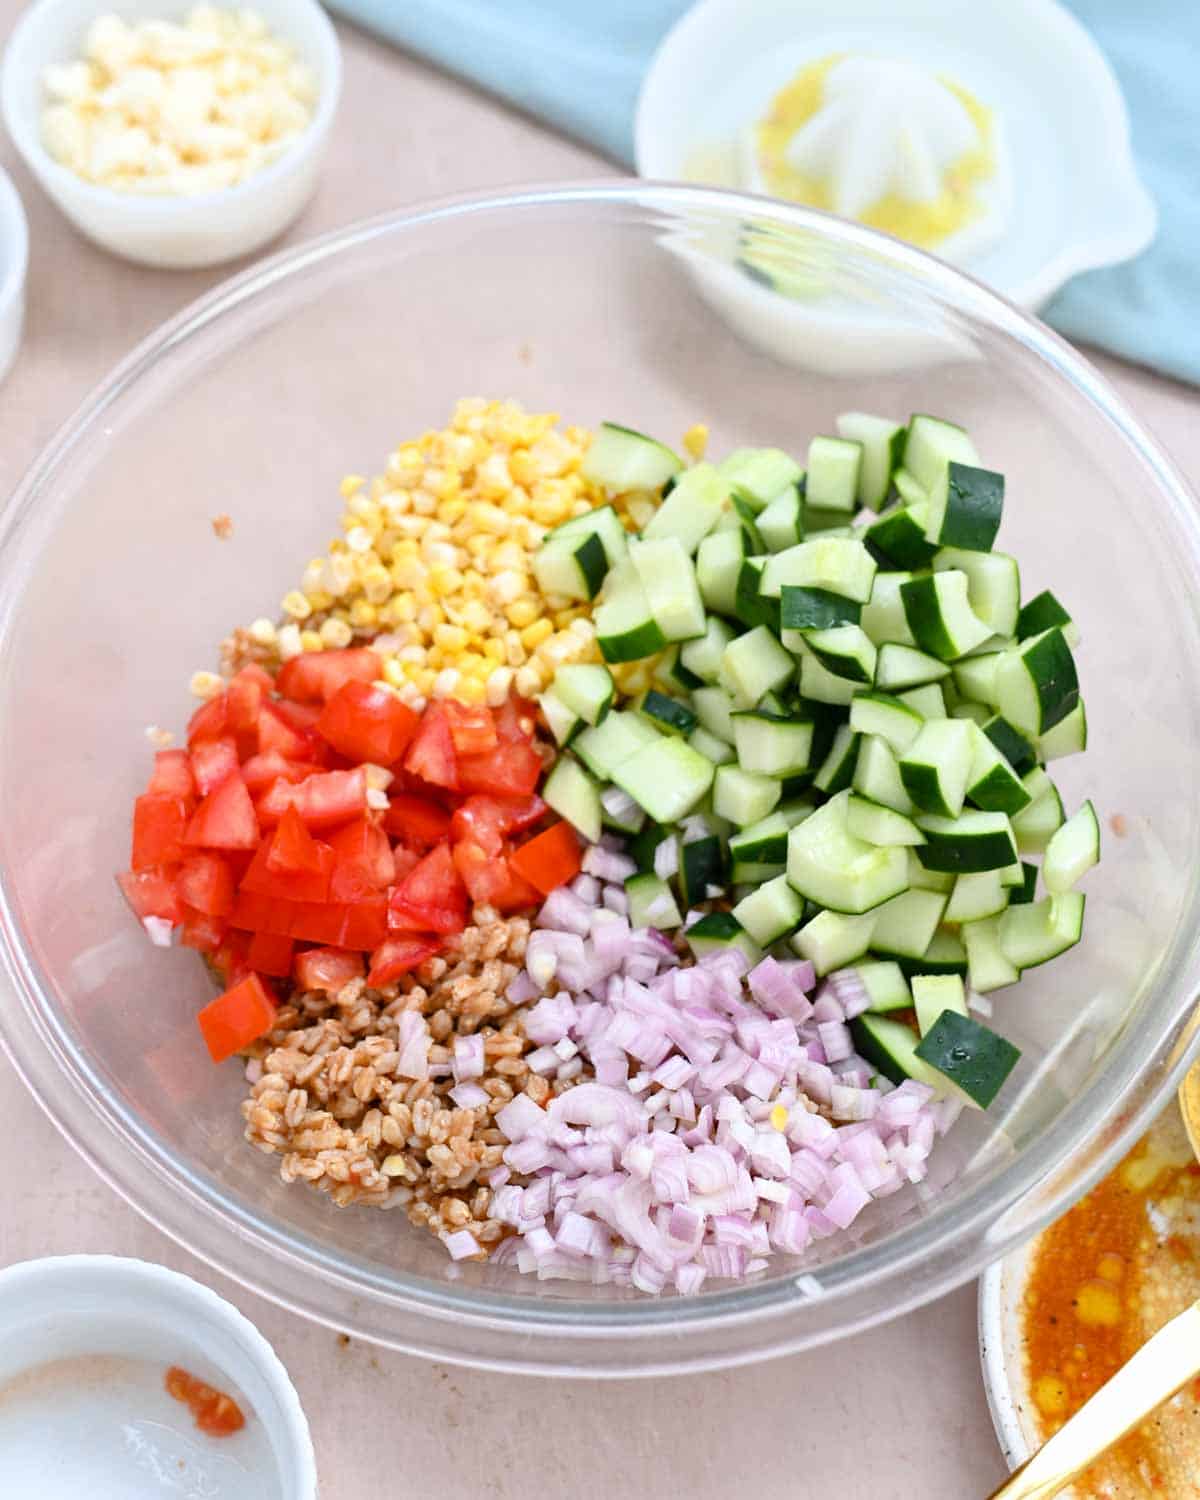 Glass bowl with segments of diced tomato, corn kernels, diced cucumber, diced shallot, and farro.